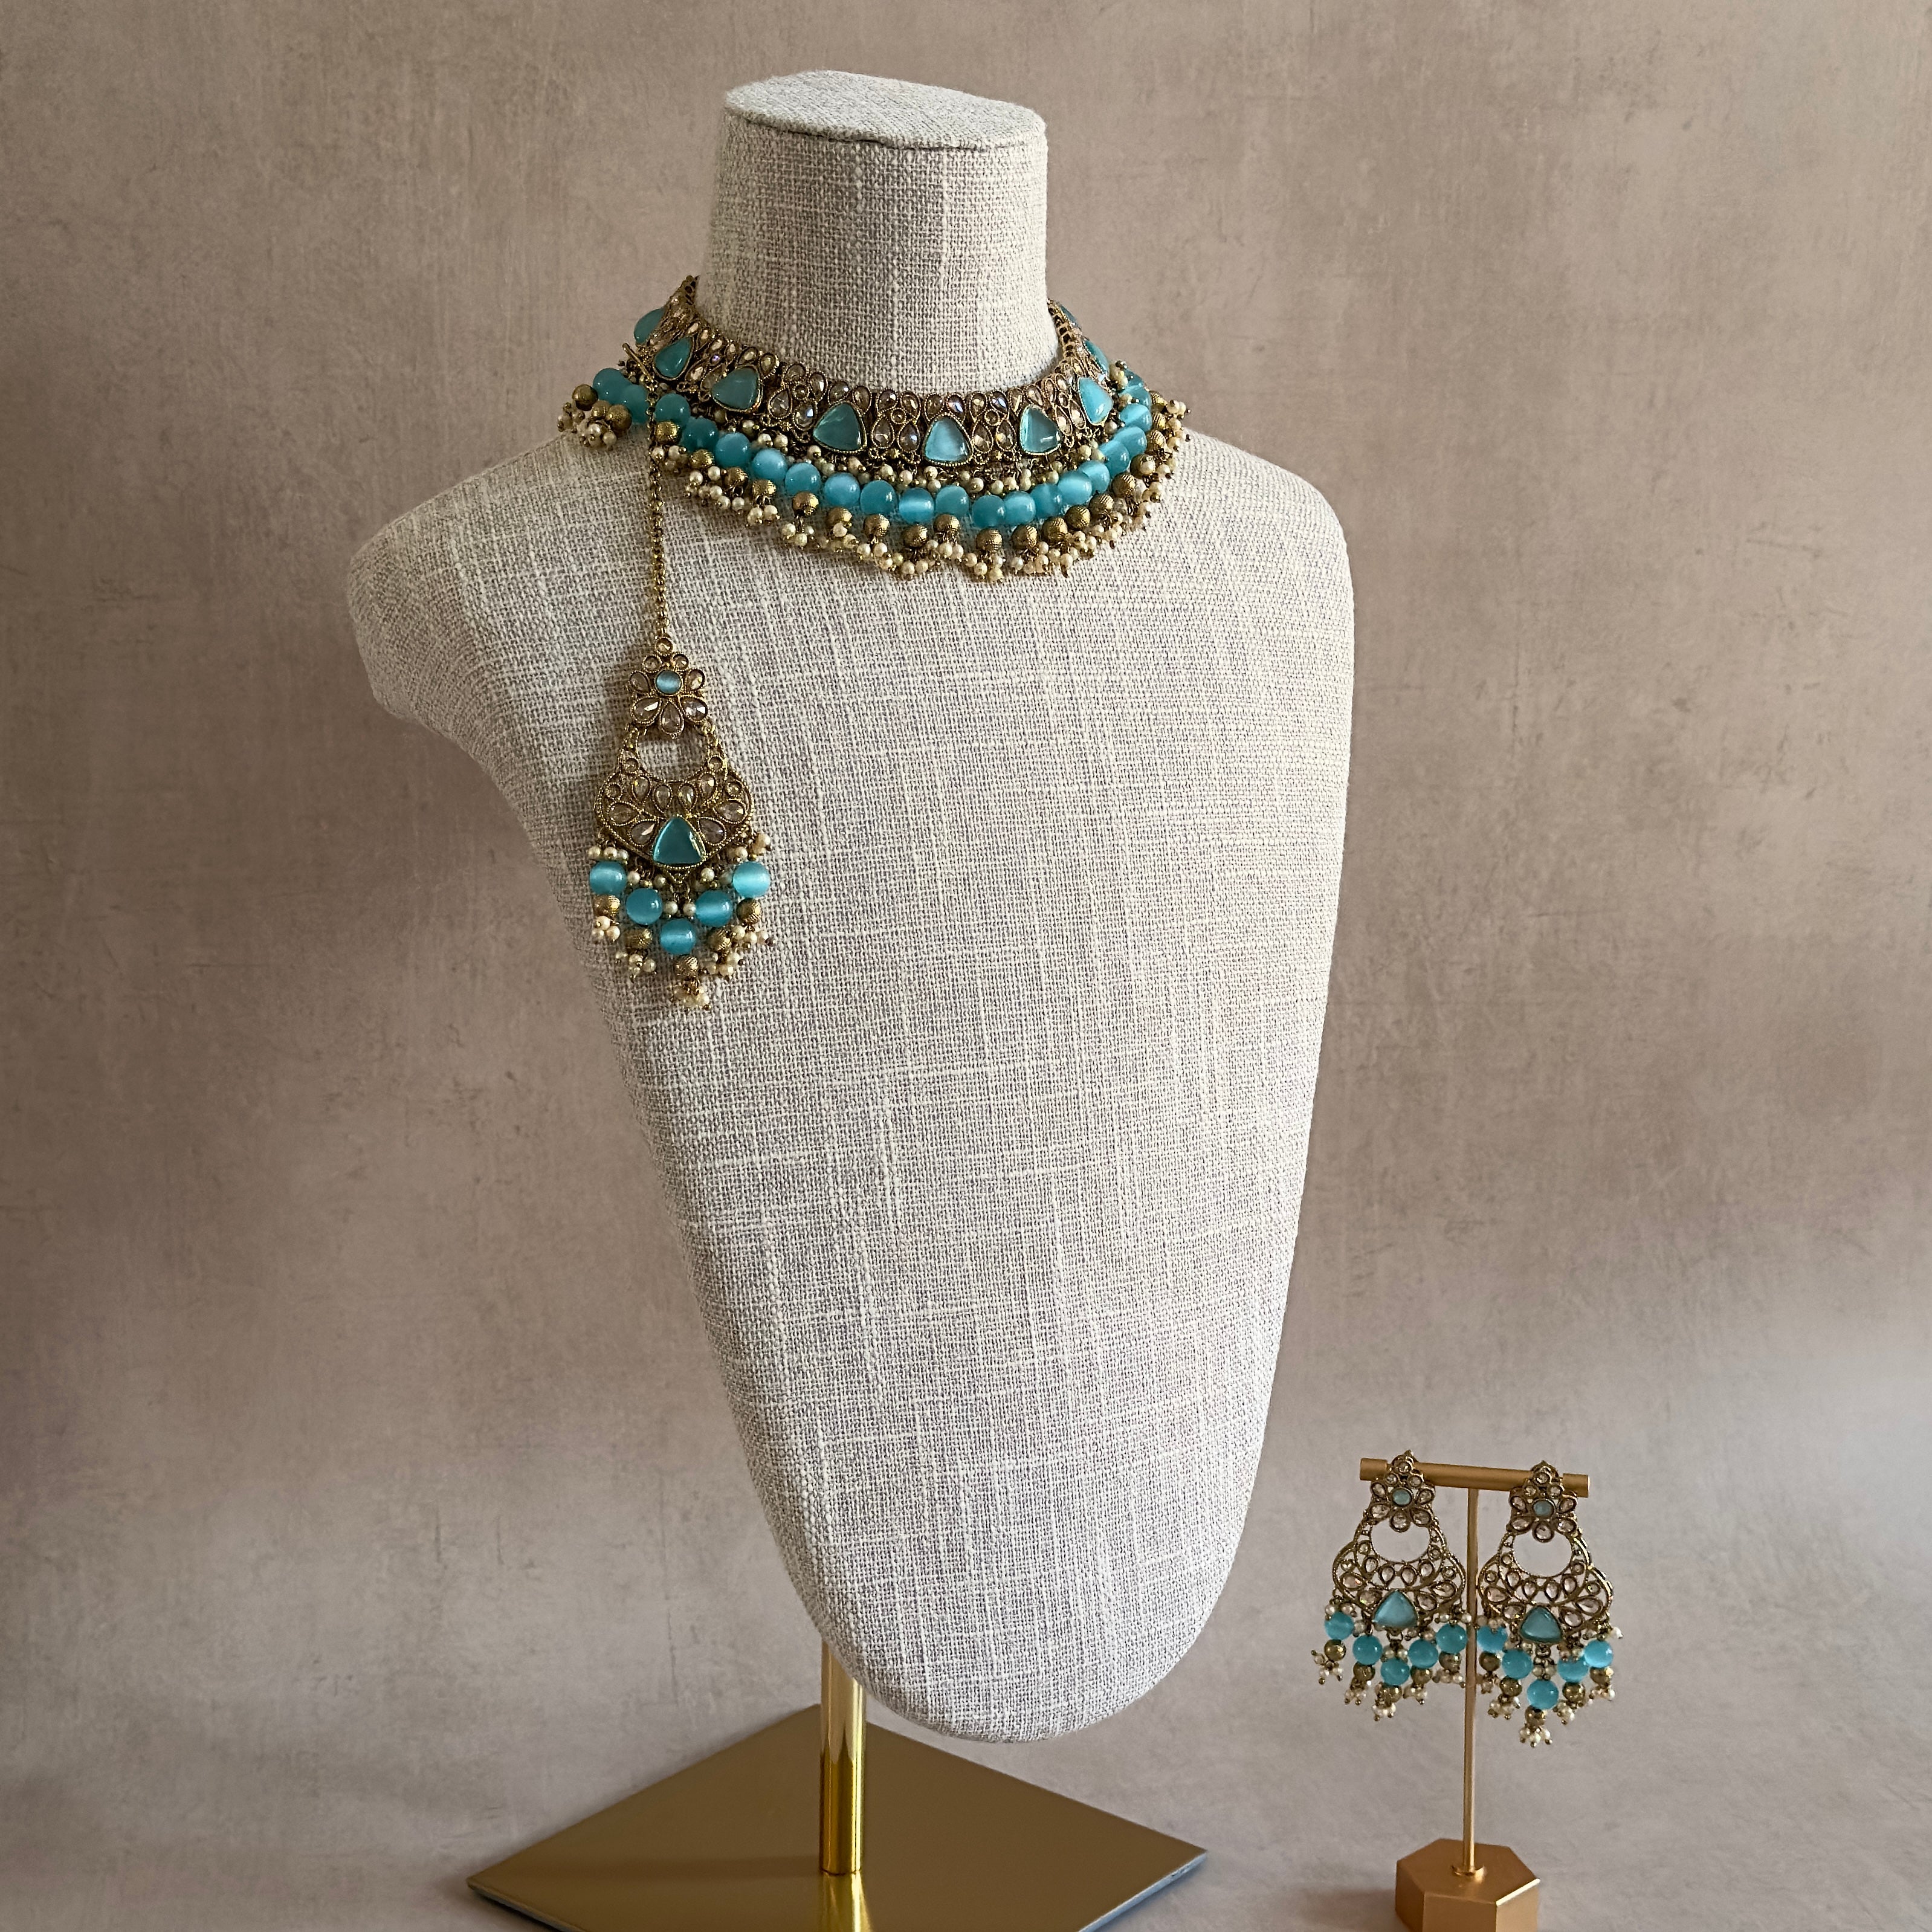 Elevate your accessories game with our Cassie Blue Choker Set. Featuring an antique gold finish and mesmerizing blue cateye stones, this set exudes sophistication. The adjustable fabric tie ensures a perfect fit, while the matching earrings and tikka complete the look. Make a luxurious statement with this must-have set.